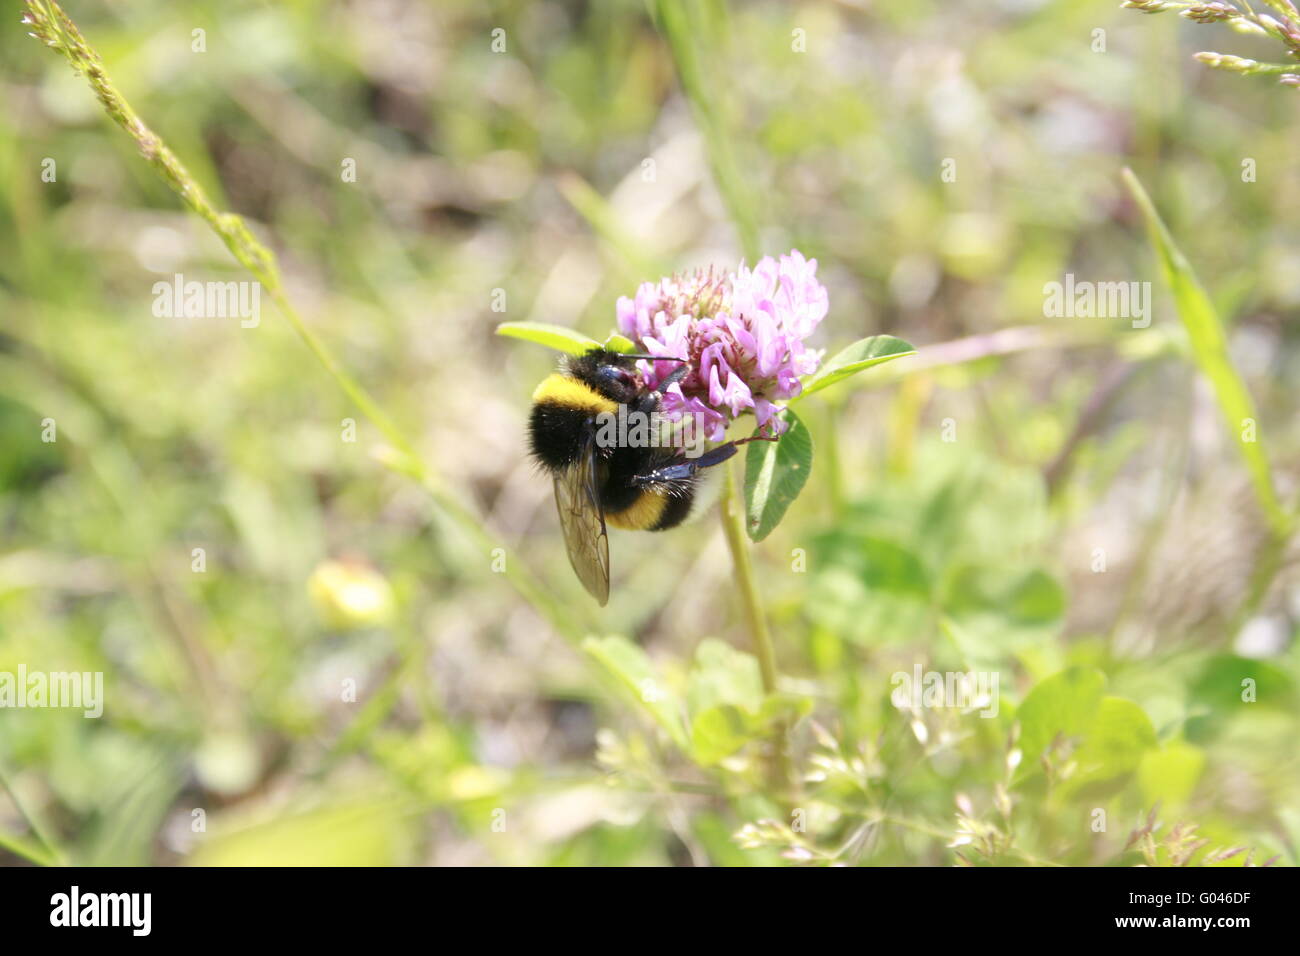 Bumblebee sitting on a clover blossom Stock Photo